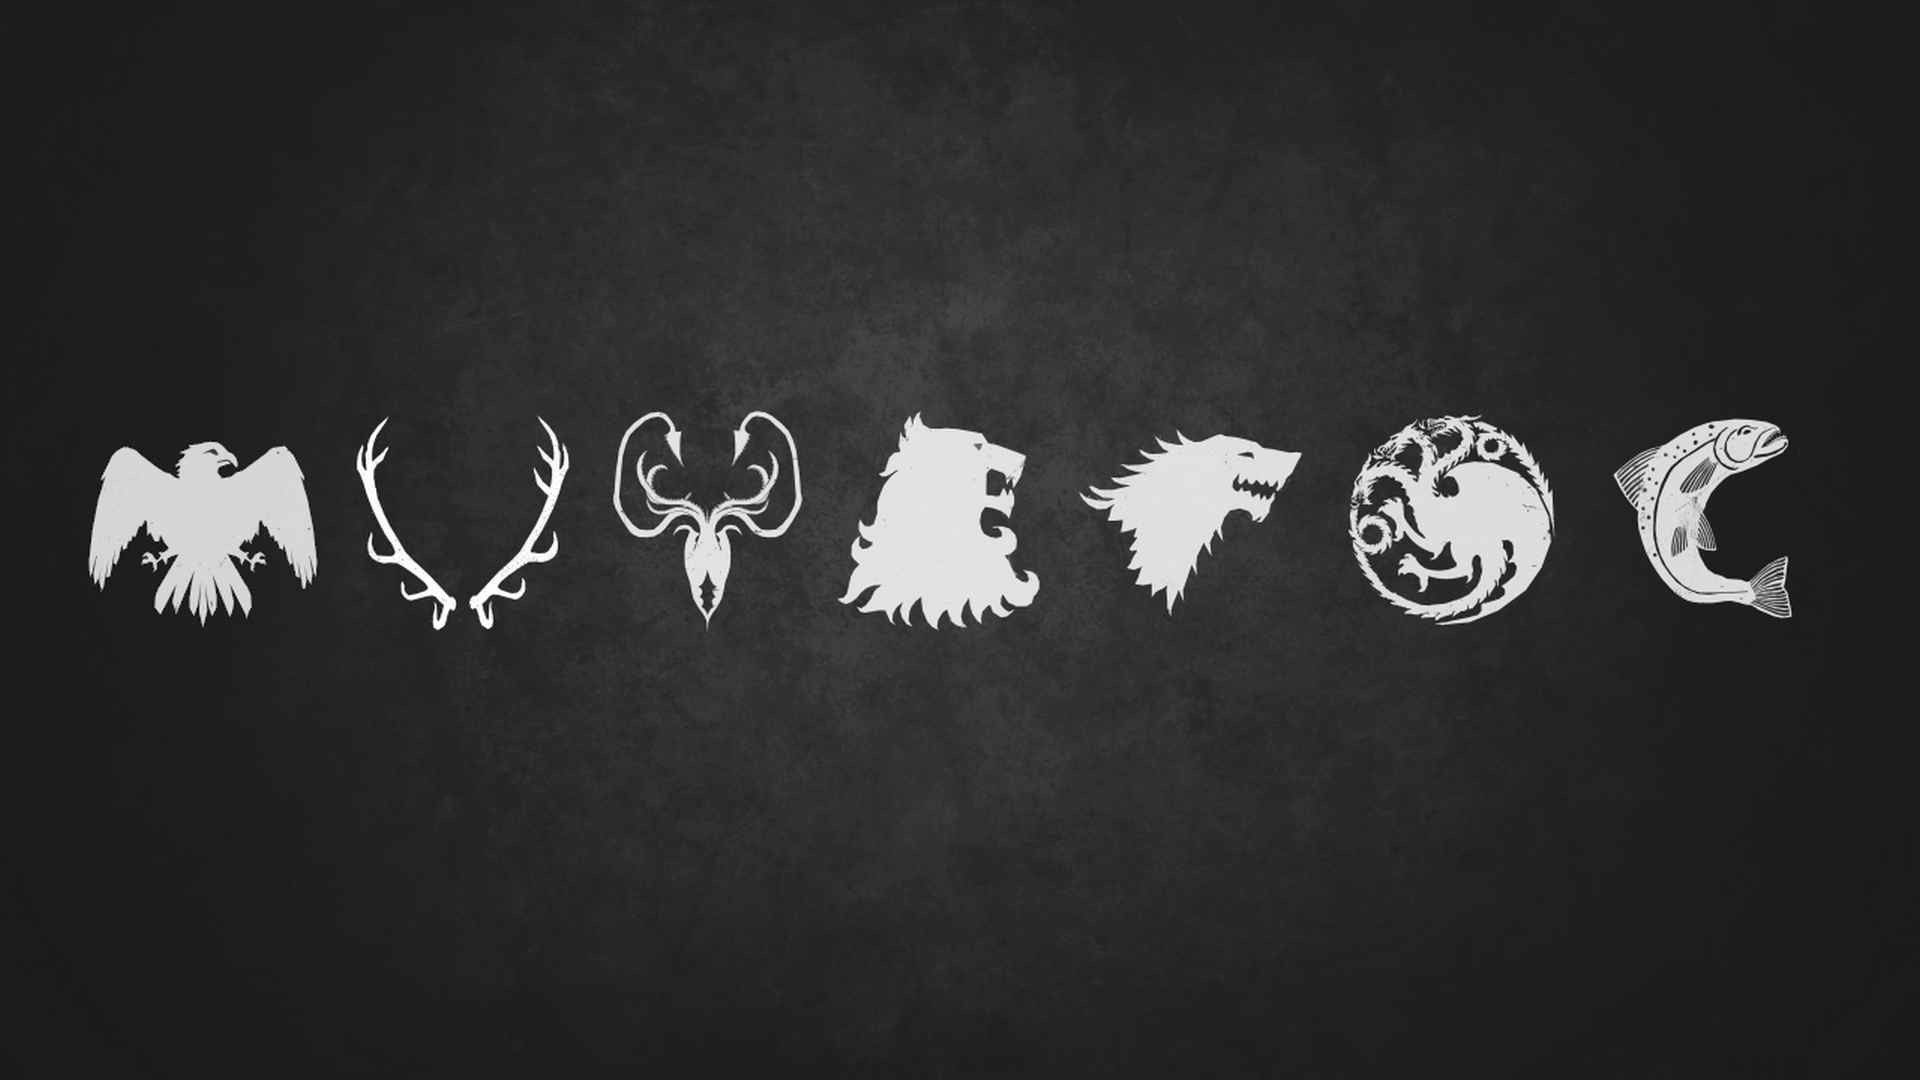 hbo game of thrones wallpaper,text,font,illustration,logo,black and white